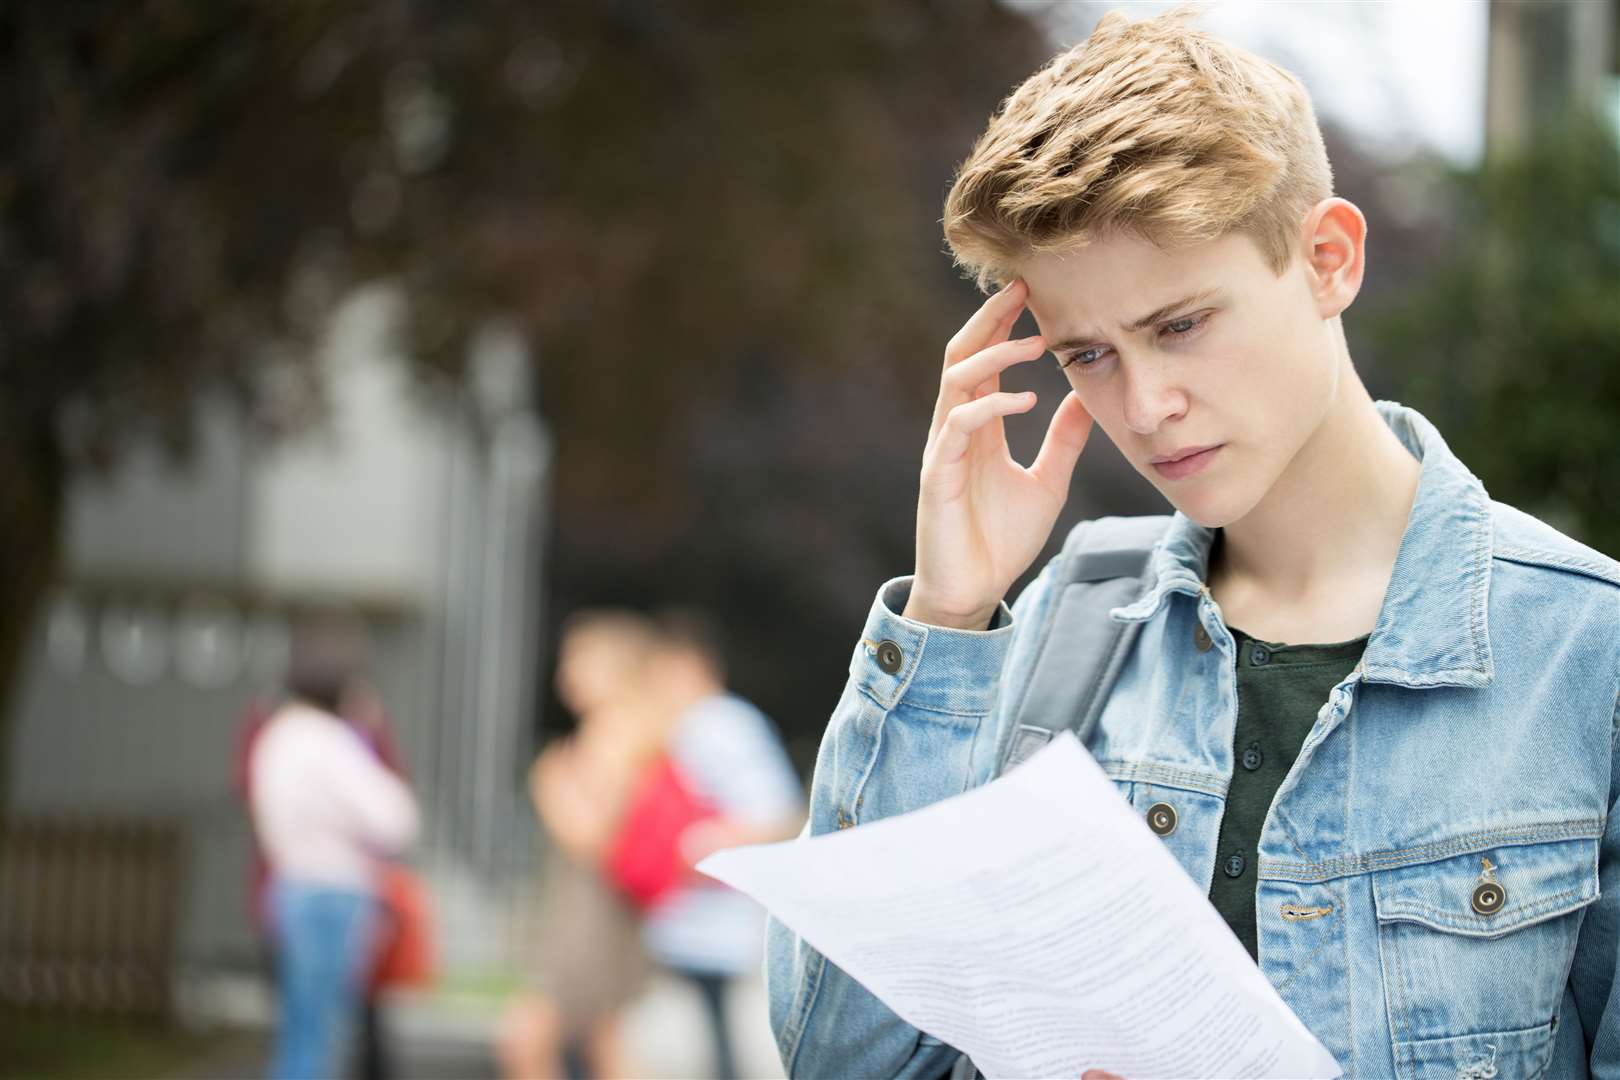 Exam results: help is on hand for anyone worrying about results.